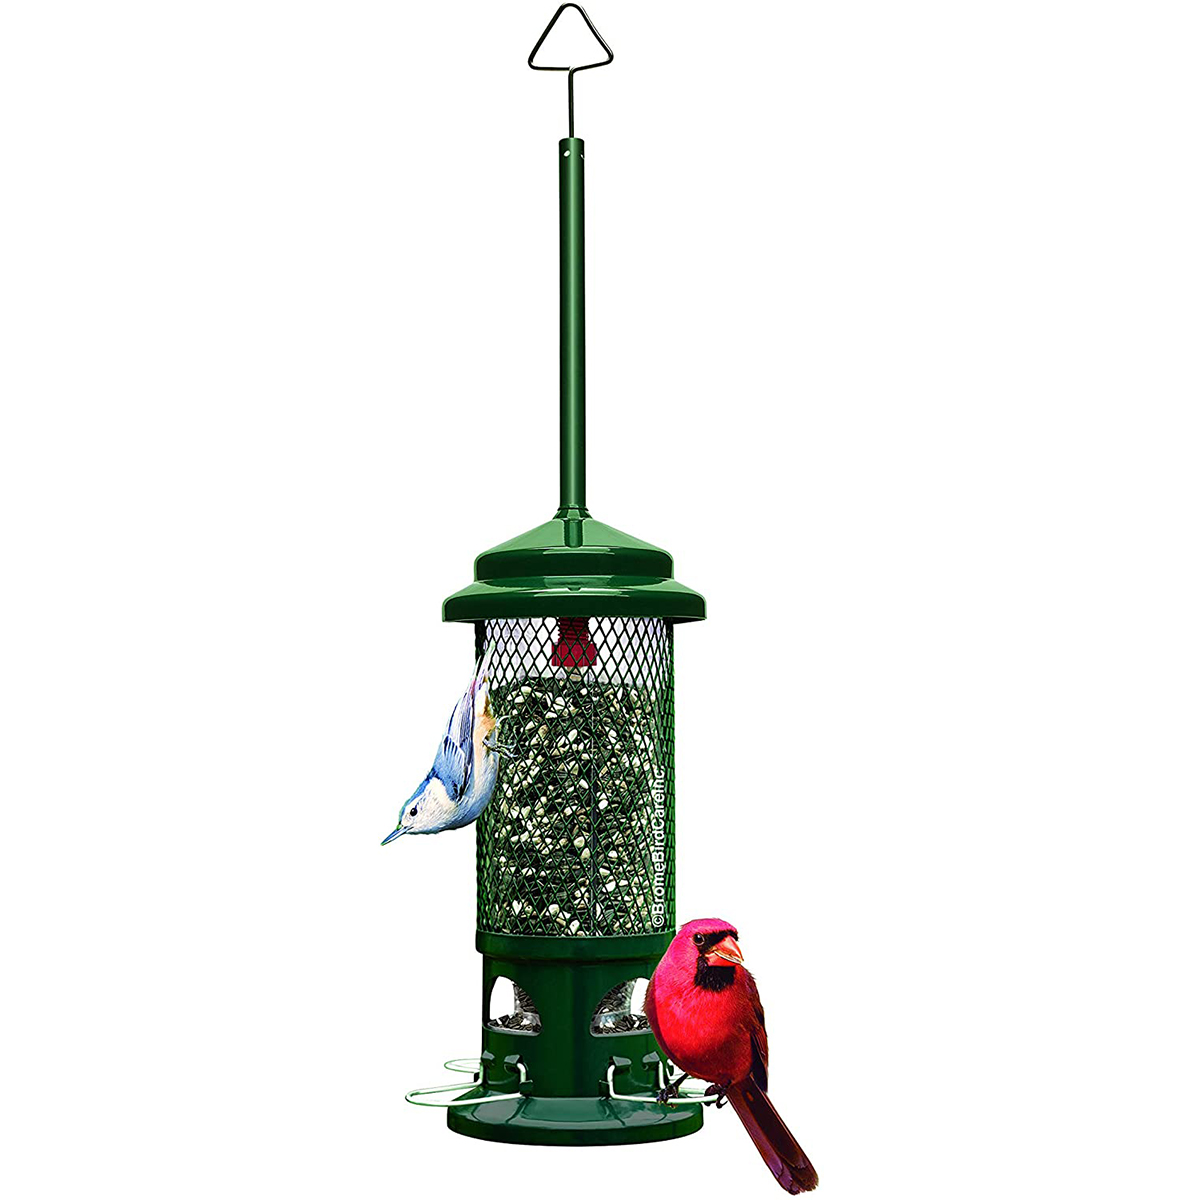 Brome Squirrel Buster Standard Squirrel-proof Feeder 